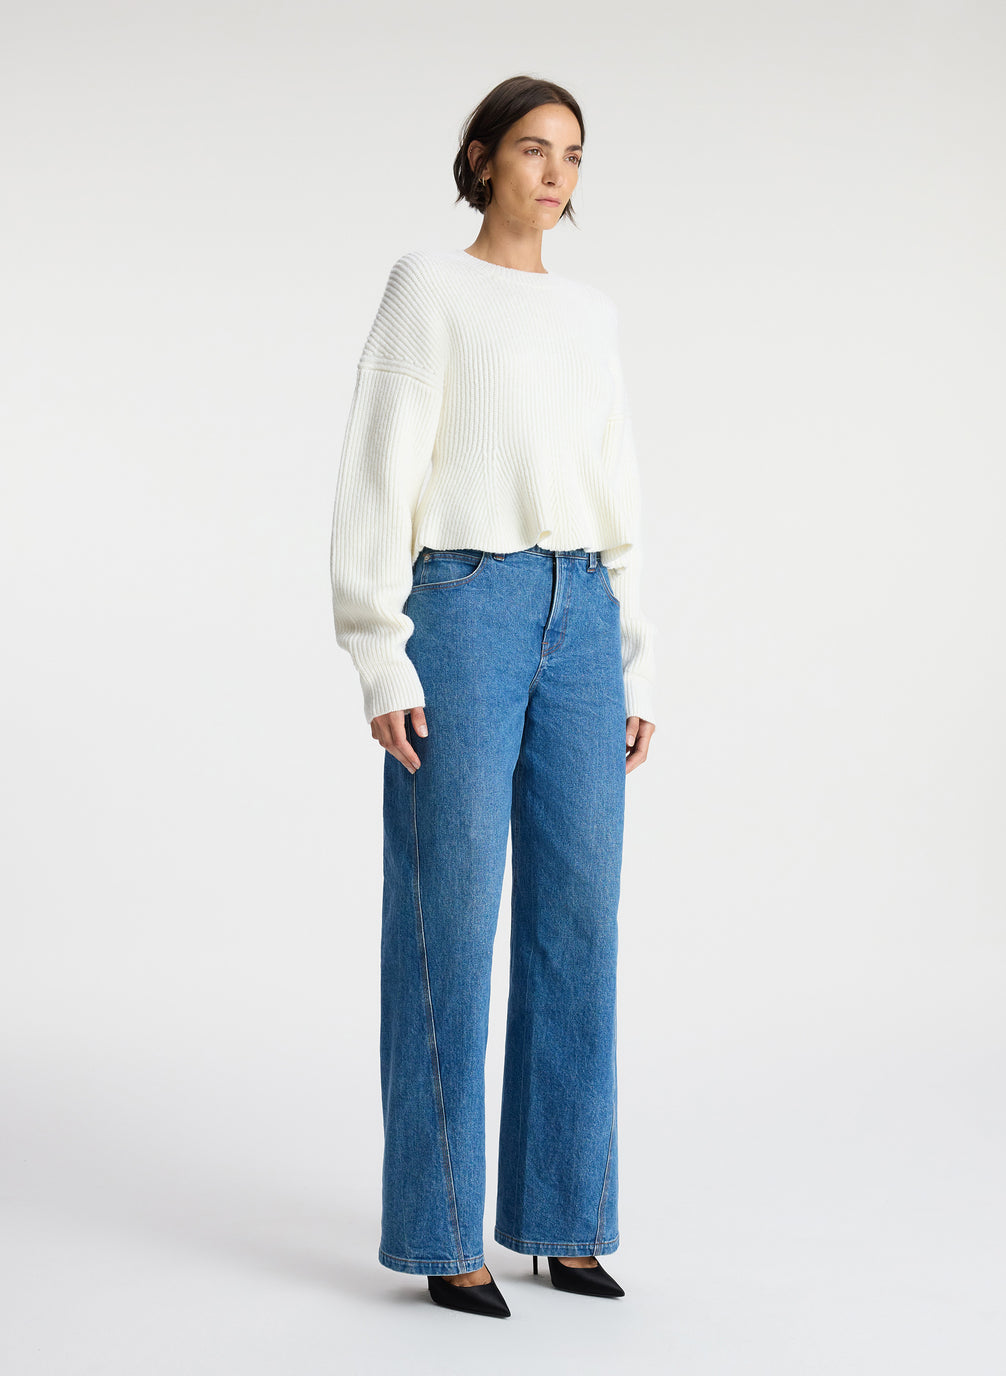 side view of woman wearing white peplum sweater and medium blue wash denim jeans